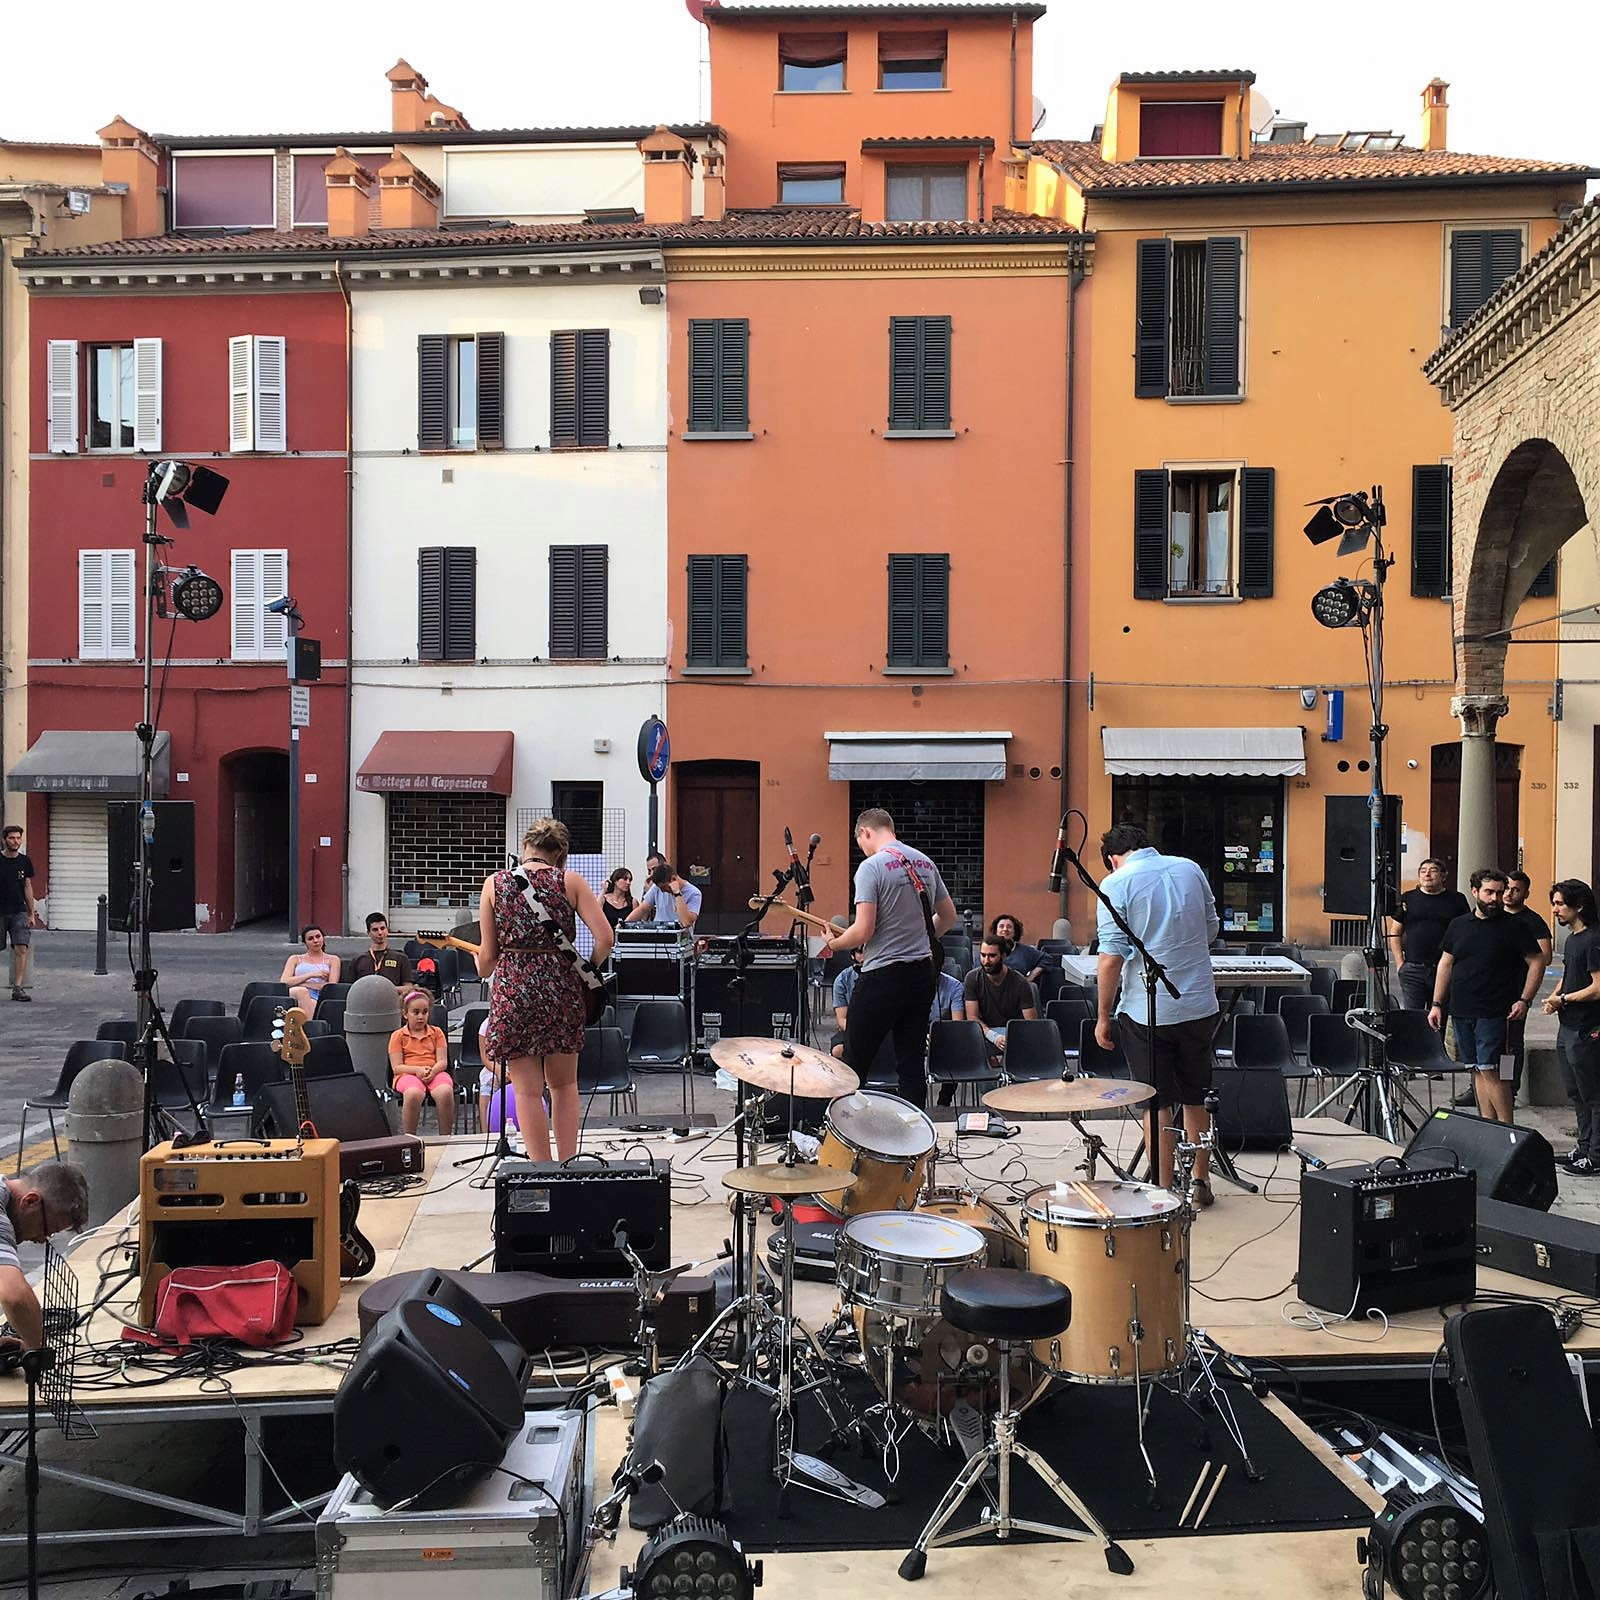 Imola Square | Imola in Musica | Backpacking with Bacon